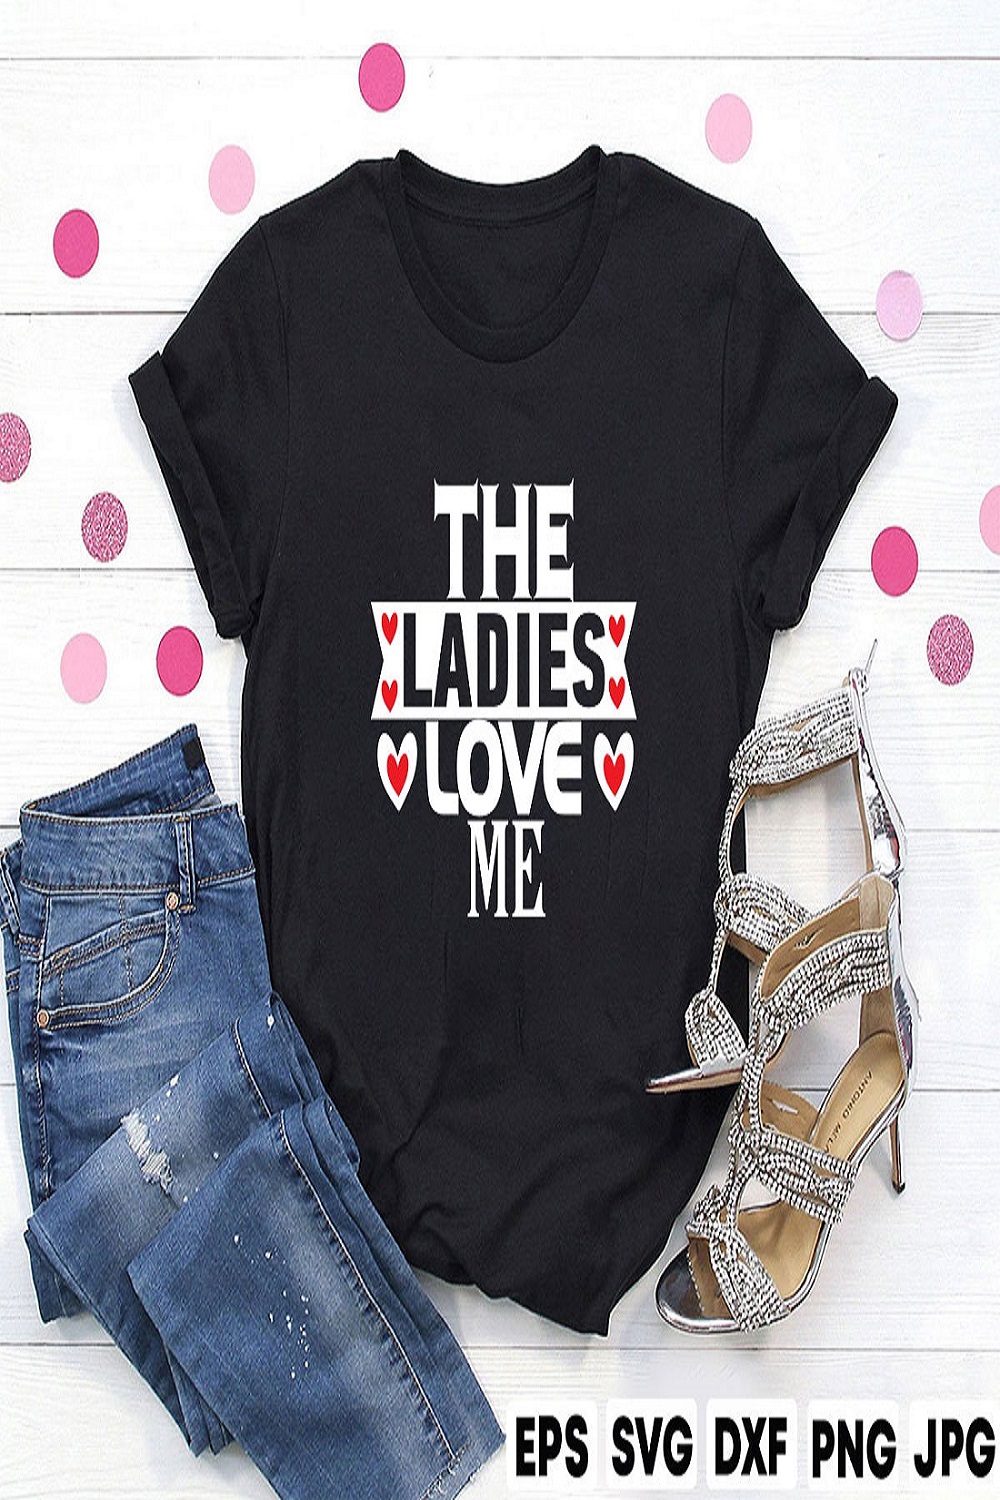 The ladies love me pinterest preview image.